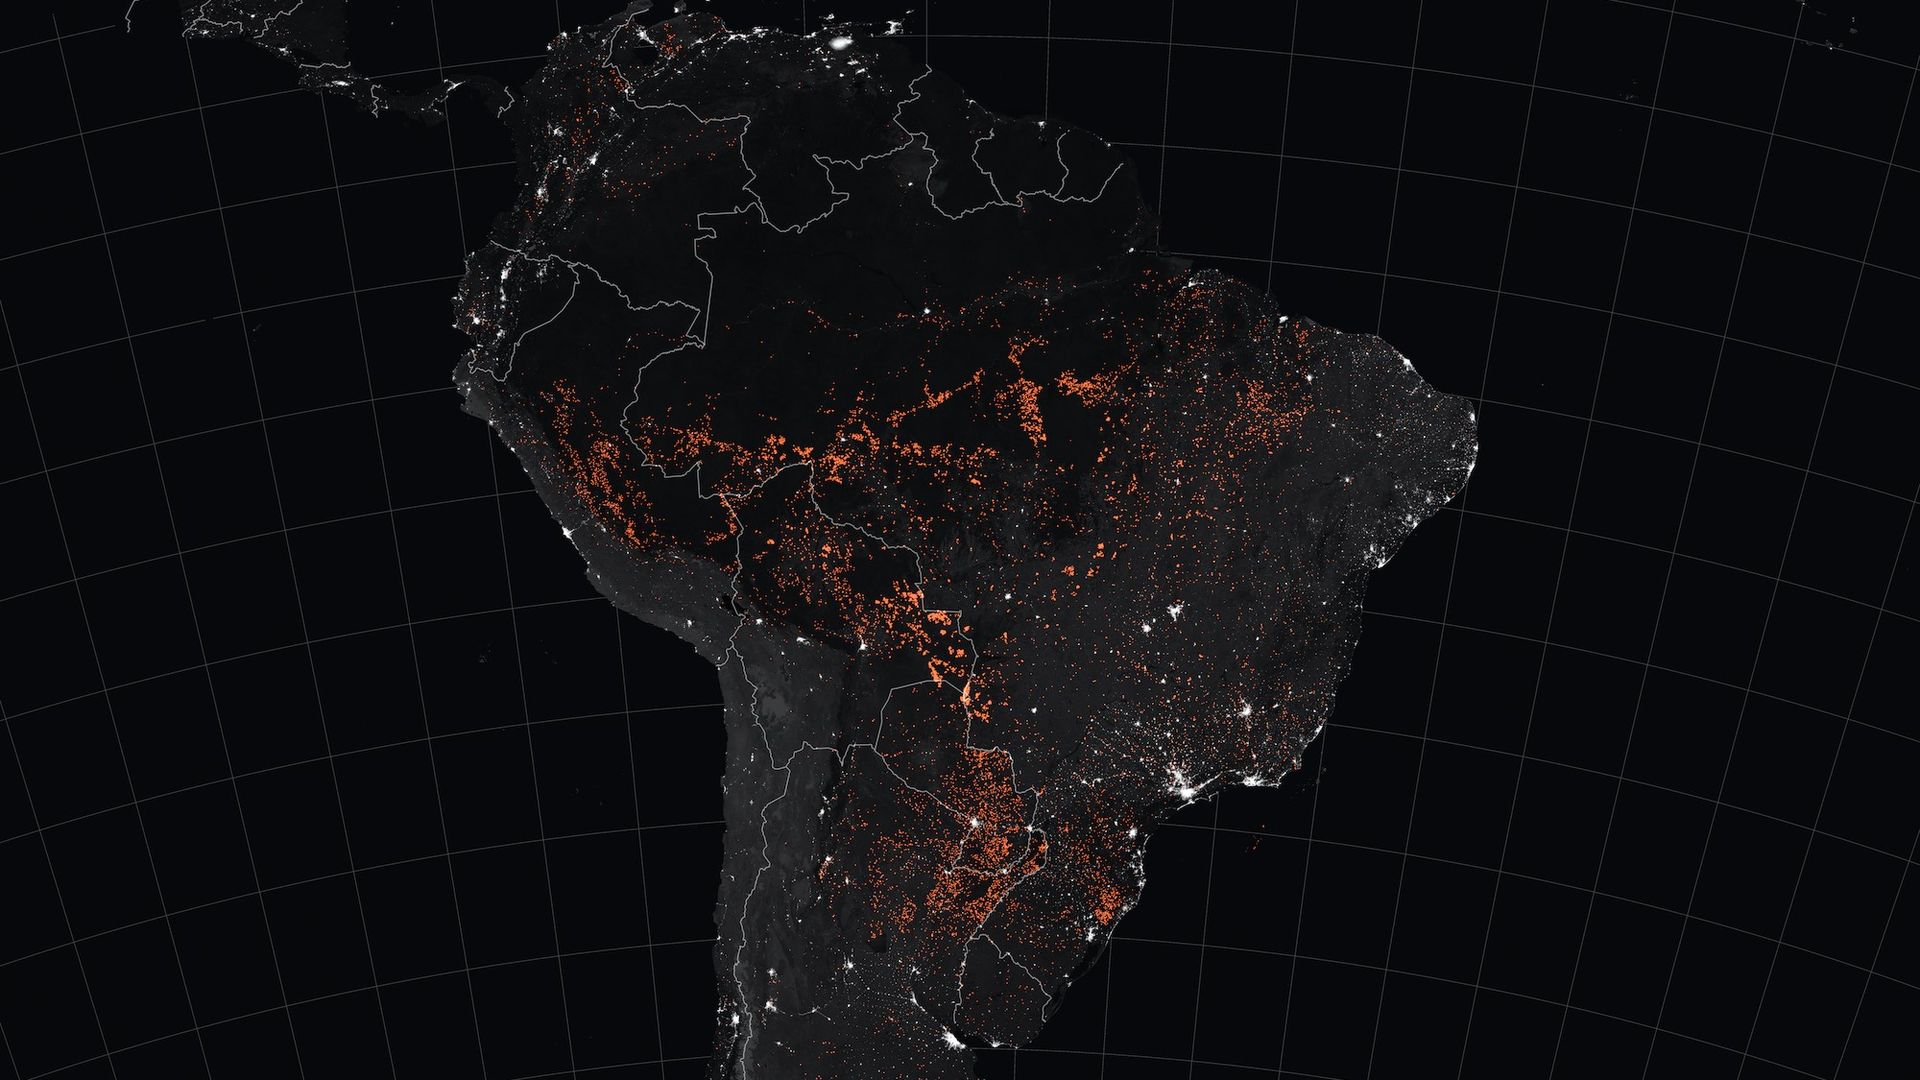 The Amazon region experiencing more fires, with more intense burns, than in recent years. 